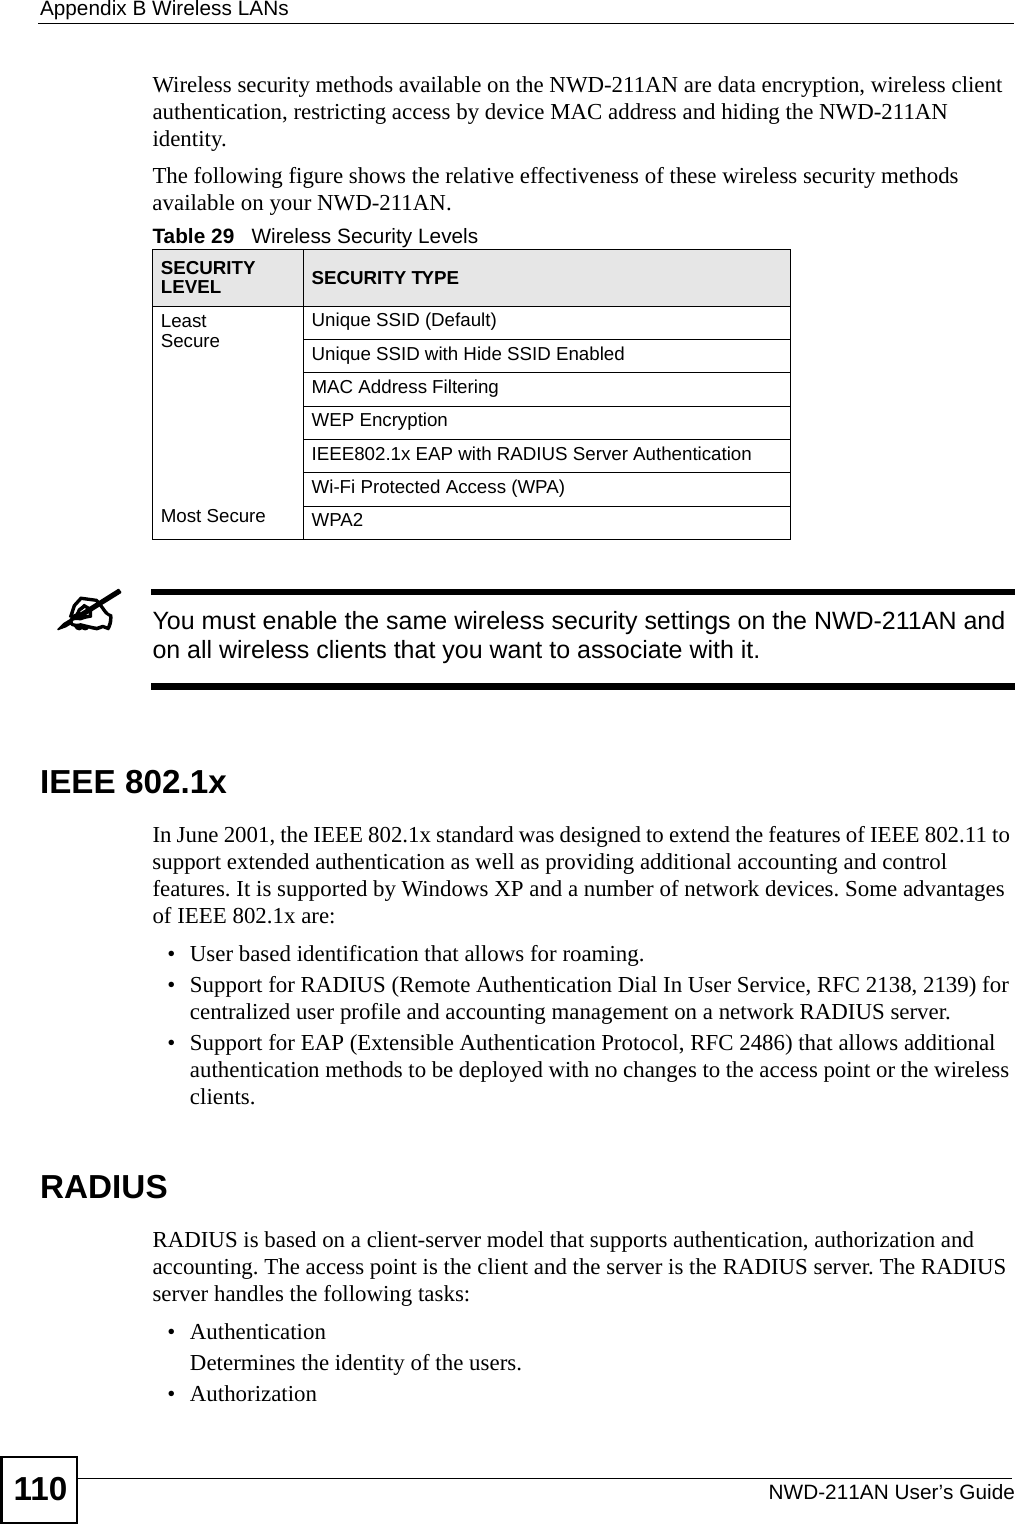 Appendix B Wireless LANsNWD-211AN User’s Guide110Wireless security methods available on the NWD-211AN are data encryption, wireless client authentication, restricting access by device MAC address and hiding the NWD-211AN identity.The following figure shows the relative effectiveness of these wireless security methods available on your NWD-211AN.&quot;You must enable the same wireless security settings on the NWD-211AN and on all wireless clients that you want to associate with it. IEEE 802.1xIn June 2001, the IEEE 802.1x standard was designed to extend the features of IEEE 802.11 to support extended authentication as well as providing additional accounting and control features. It is supported by Windows XP and a number of network devices. Some advantages of IEEE 802.1x are:• User based identification that allows for roaming.• Support for RADIUS (Remote Authentication Dial In User Service, RFC 2138, 2139) for centralized user profile and accounting management on a network RADIUS server. • Support for EAP (Extensible Authentication Protocol, RFC 2486) that allows additional authentication methods to be deployed with no changes to the access point or the wireless clients. RADIUSRADIUS is based on a client-server model that supports authentication, authorization and accounting. The access point is the client and the server is the RADIUS server. The RADIUS server handles the following tasks:• Authentication Determines the identity of the users.• AuthorizationTable 29   Wireless Security LevelsSECURITY LEVEL SECURITY TYPELeast       S e c u r e                                                                                       Most SecureUnique SSID (Default)Unique SSID with Hide SSID EnabledMAC Address FilteringWEP EncryptionIEEE802.1x EAP with RADIUS Server AuthenticationWi-Fi Protected Access (WPA)WPA2